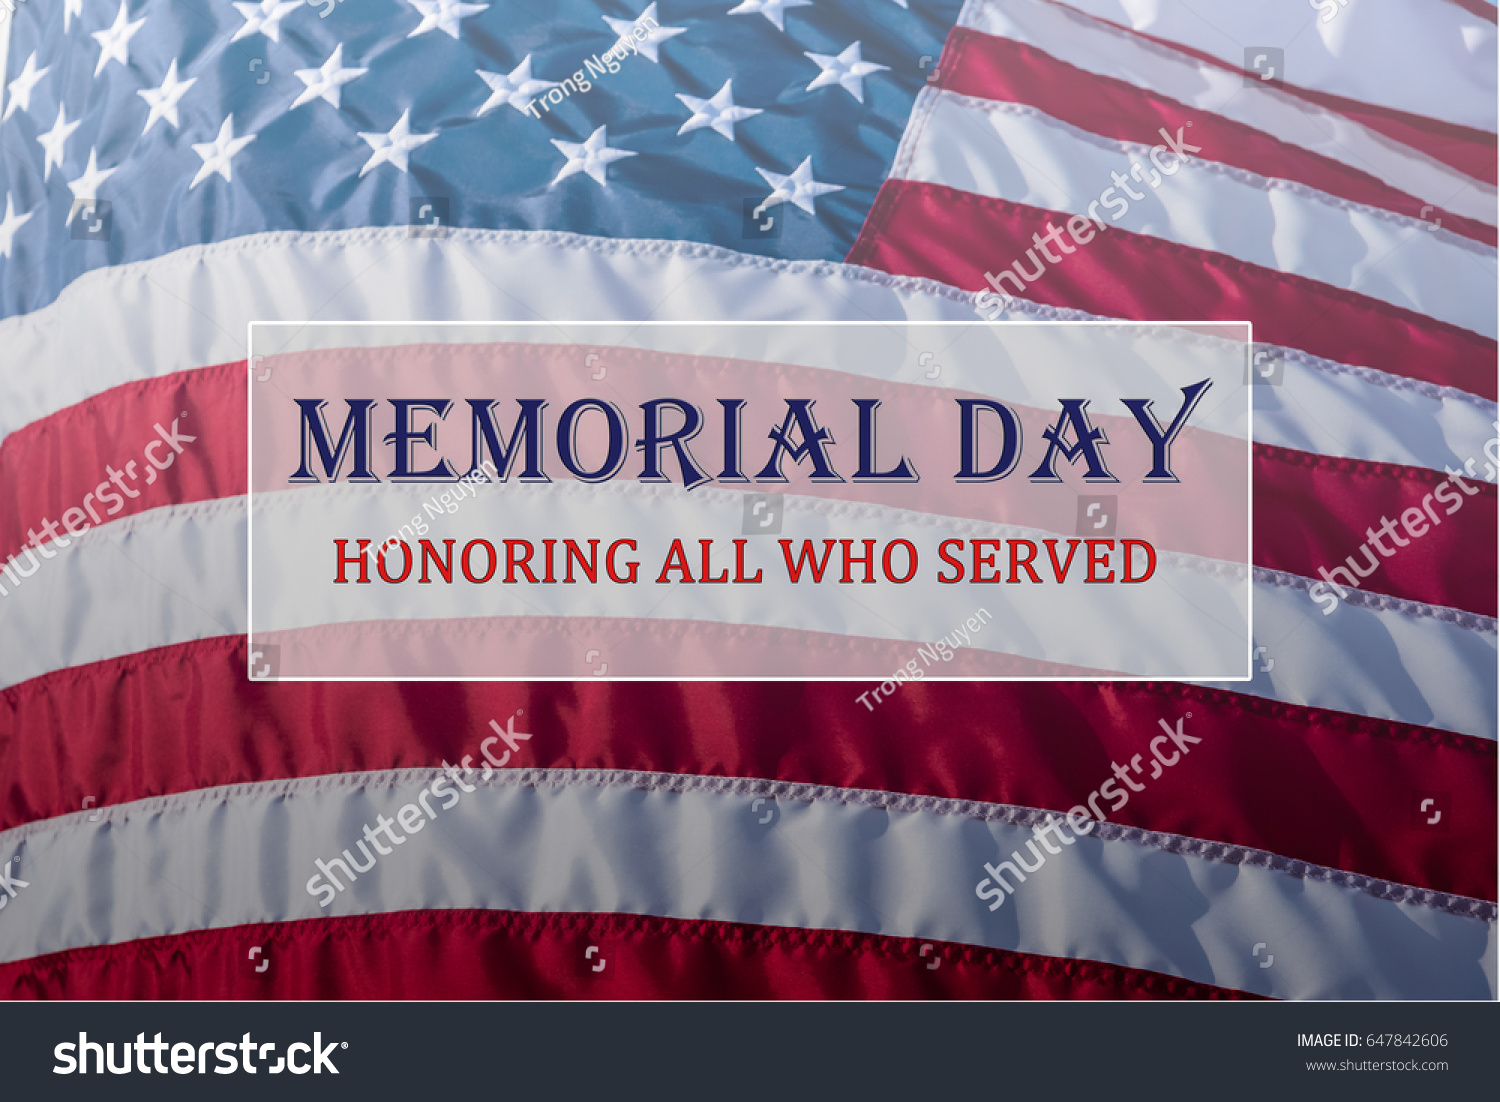 Text Memorial Day and Honor on flowing American flag background. Concept of Memorial day or Veteran's day in America. #647842606